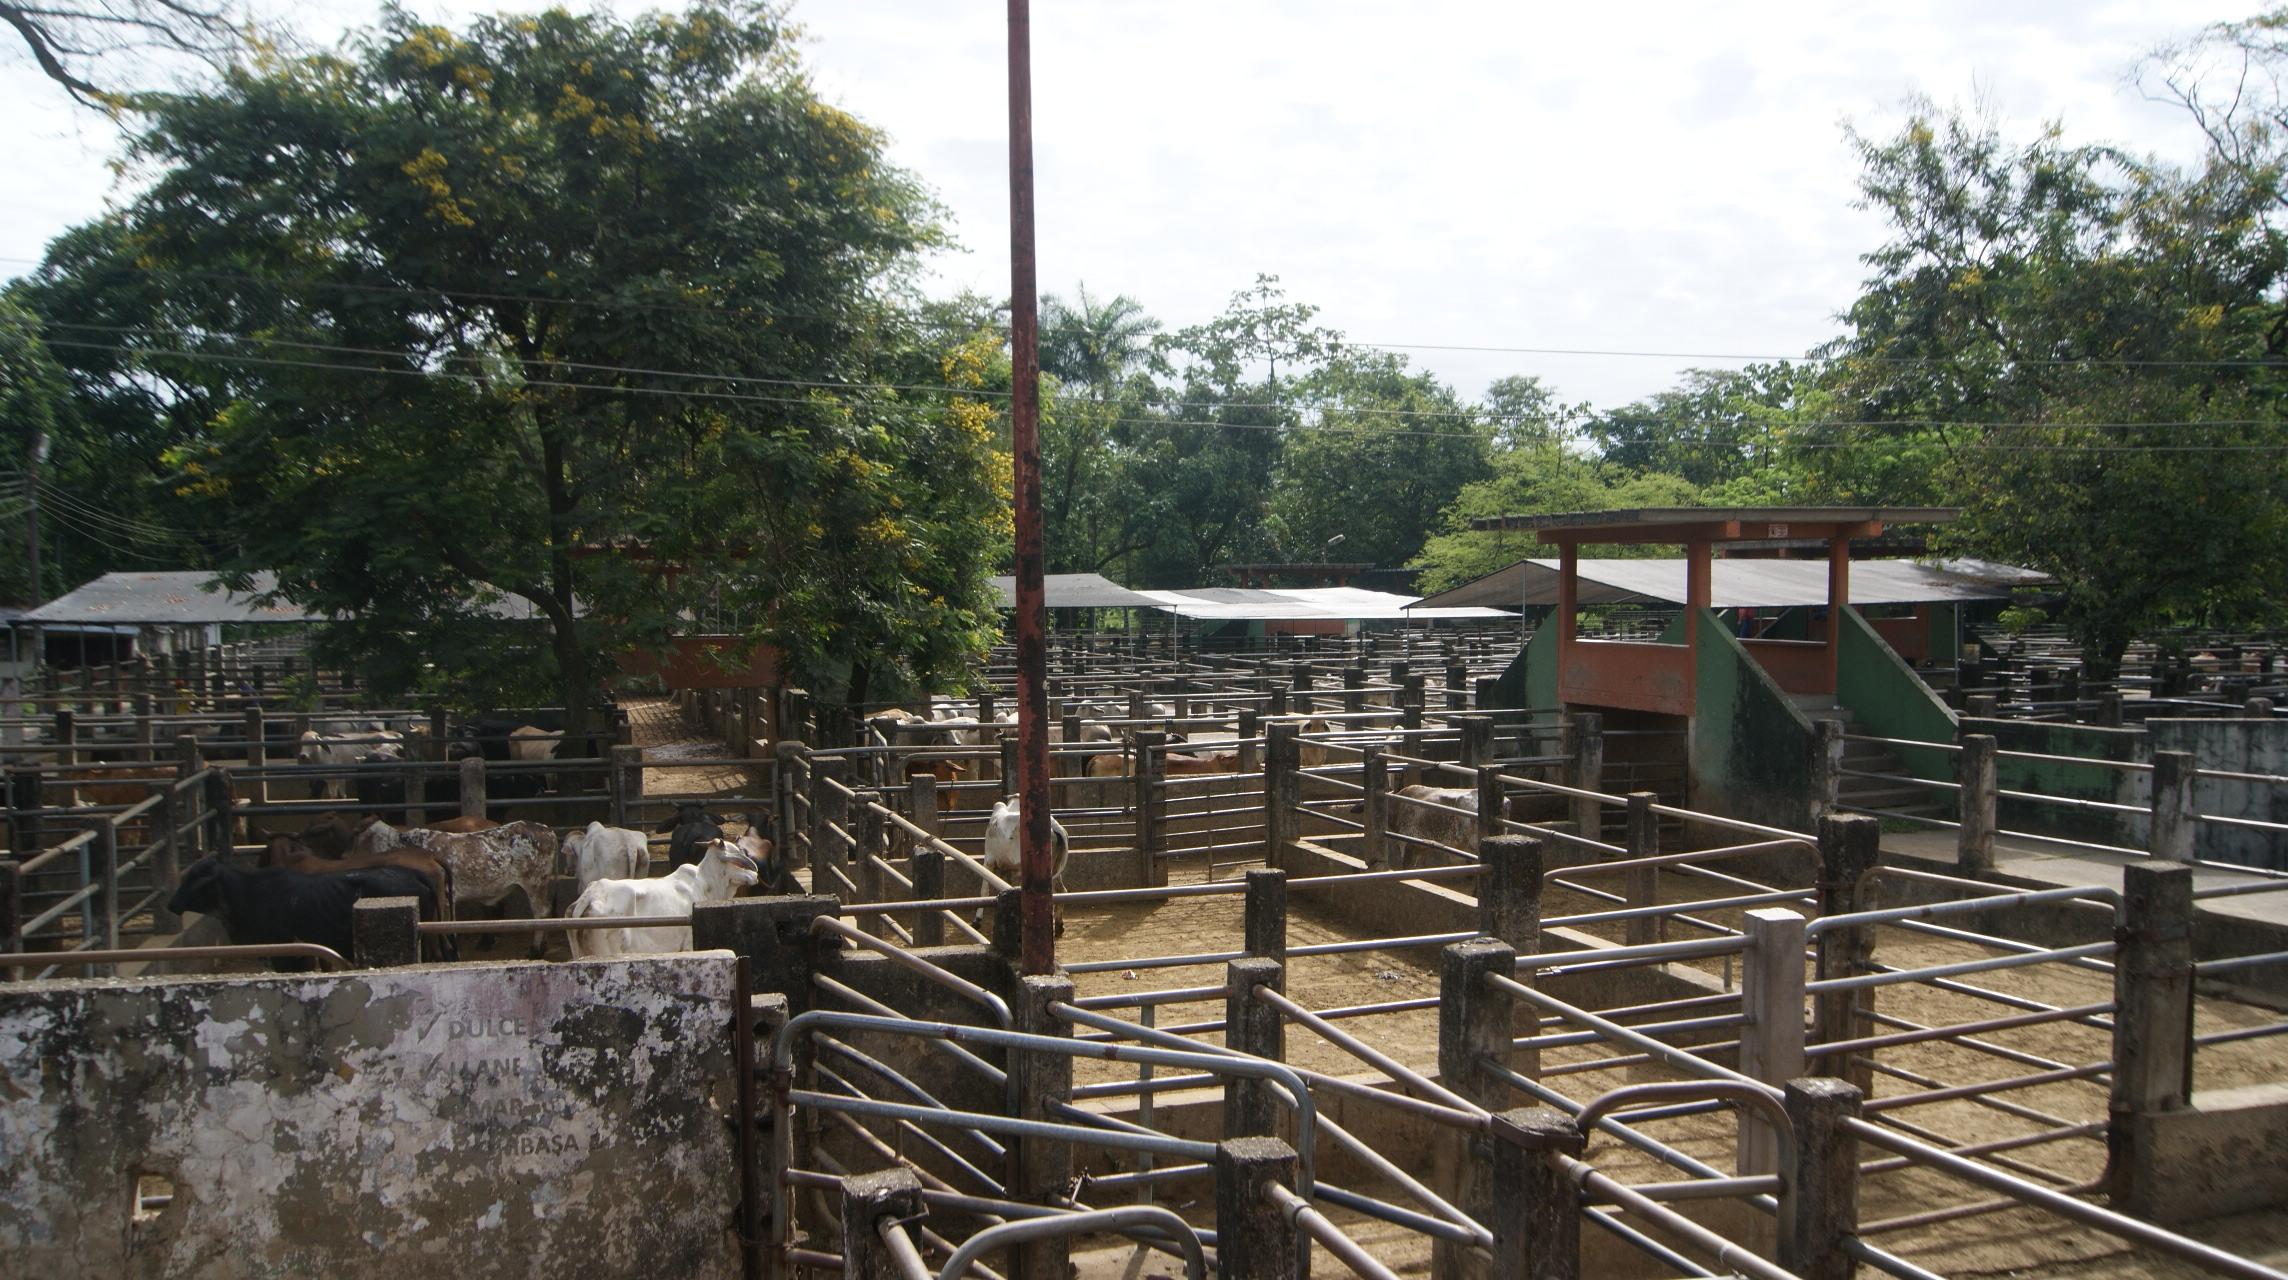 A maze of fences and gates with some cattle inside, shaded by trees, in rural Colombia.